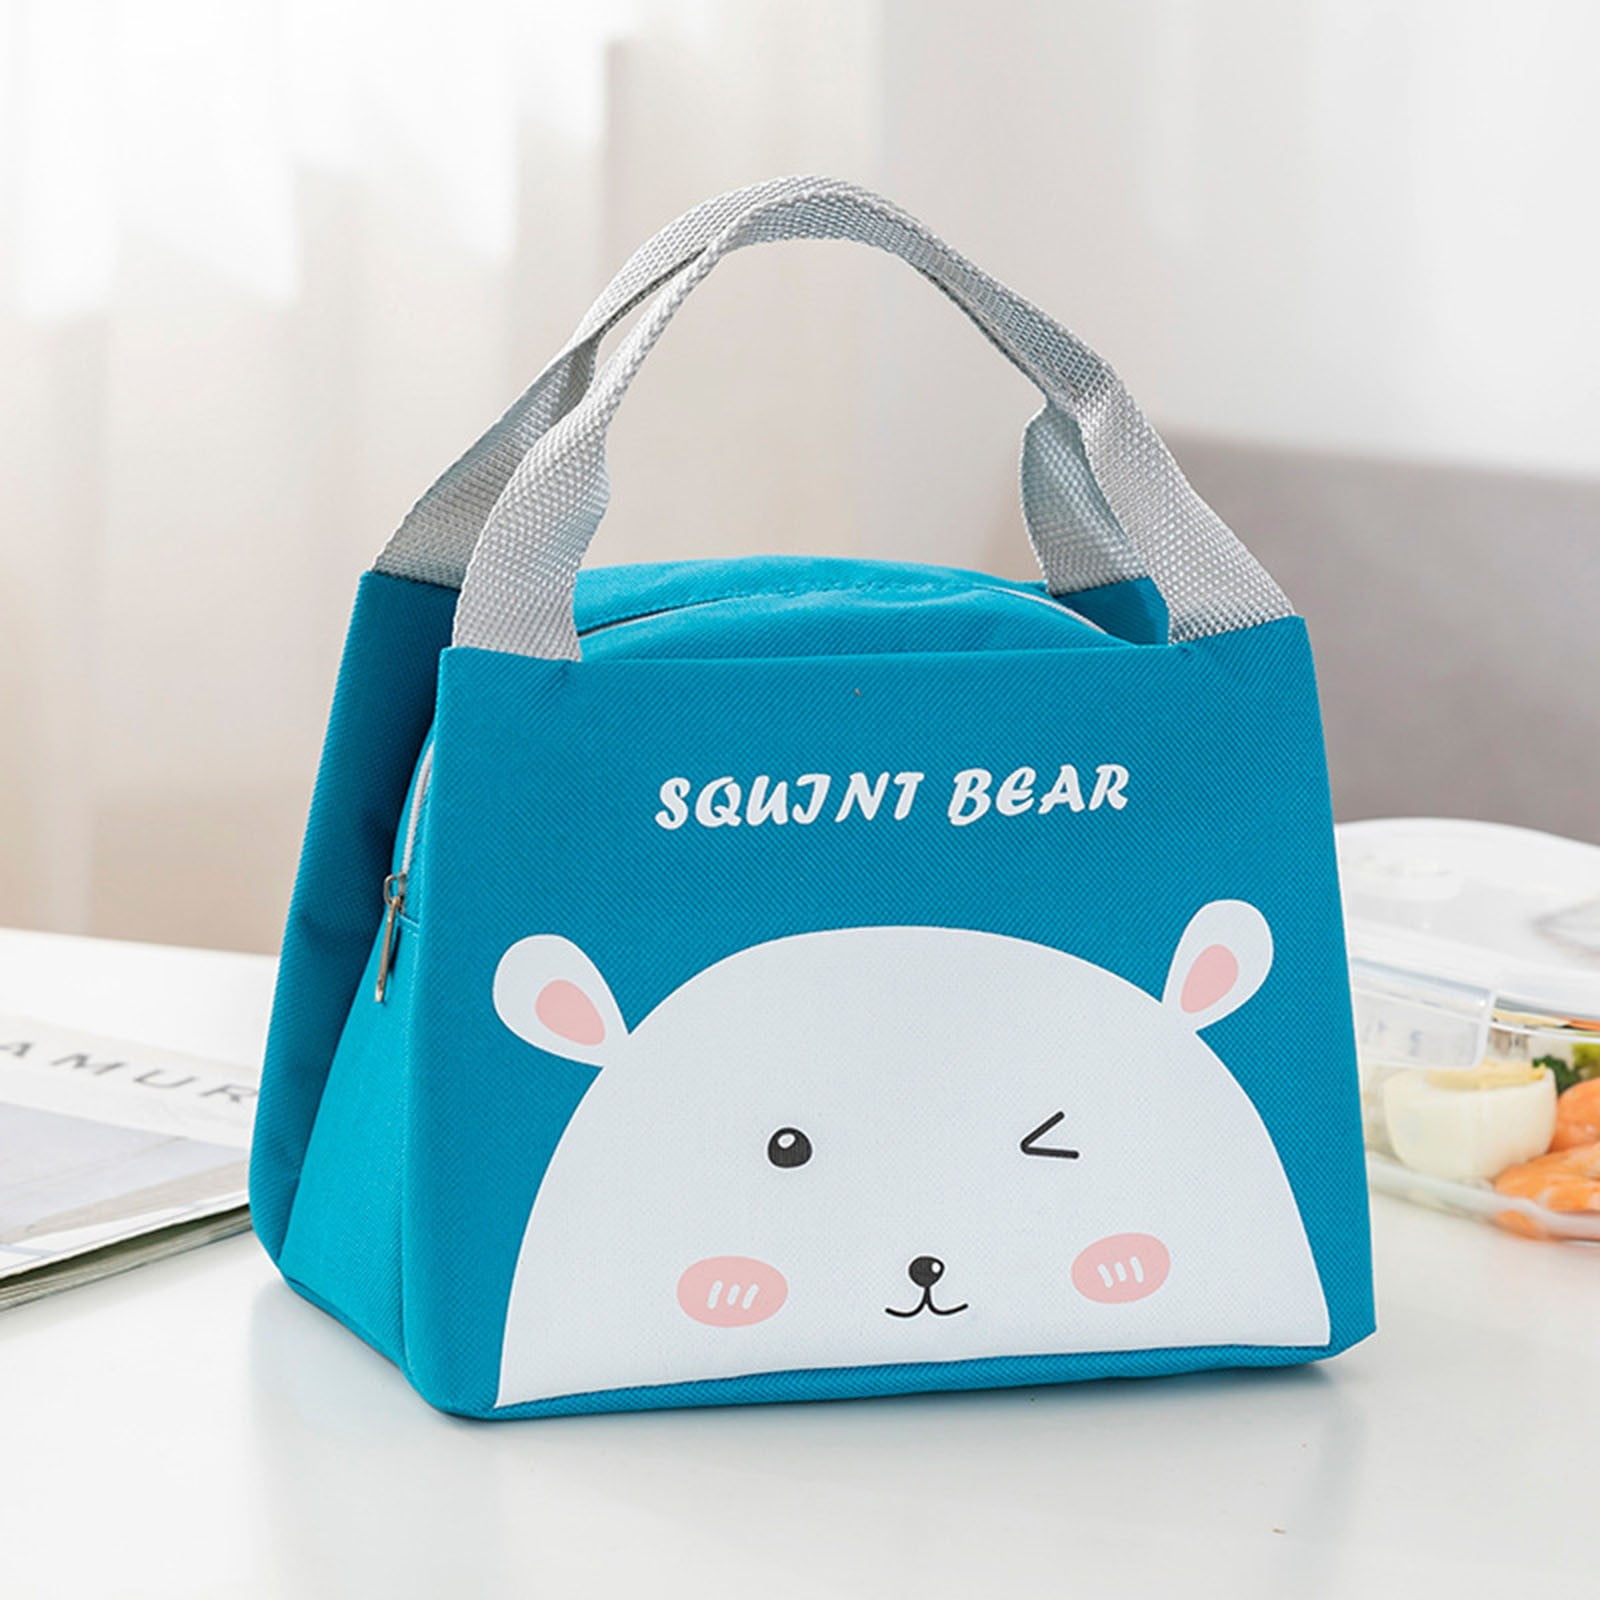 Lunch Bag Insulated Thermal Food Storage Bag Portable Travel Working Bento Box A 